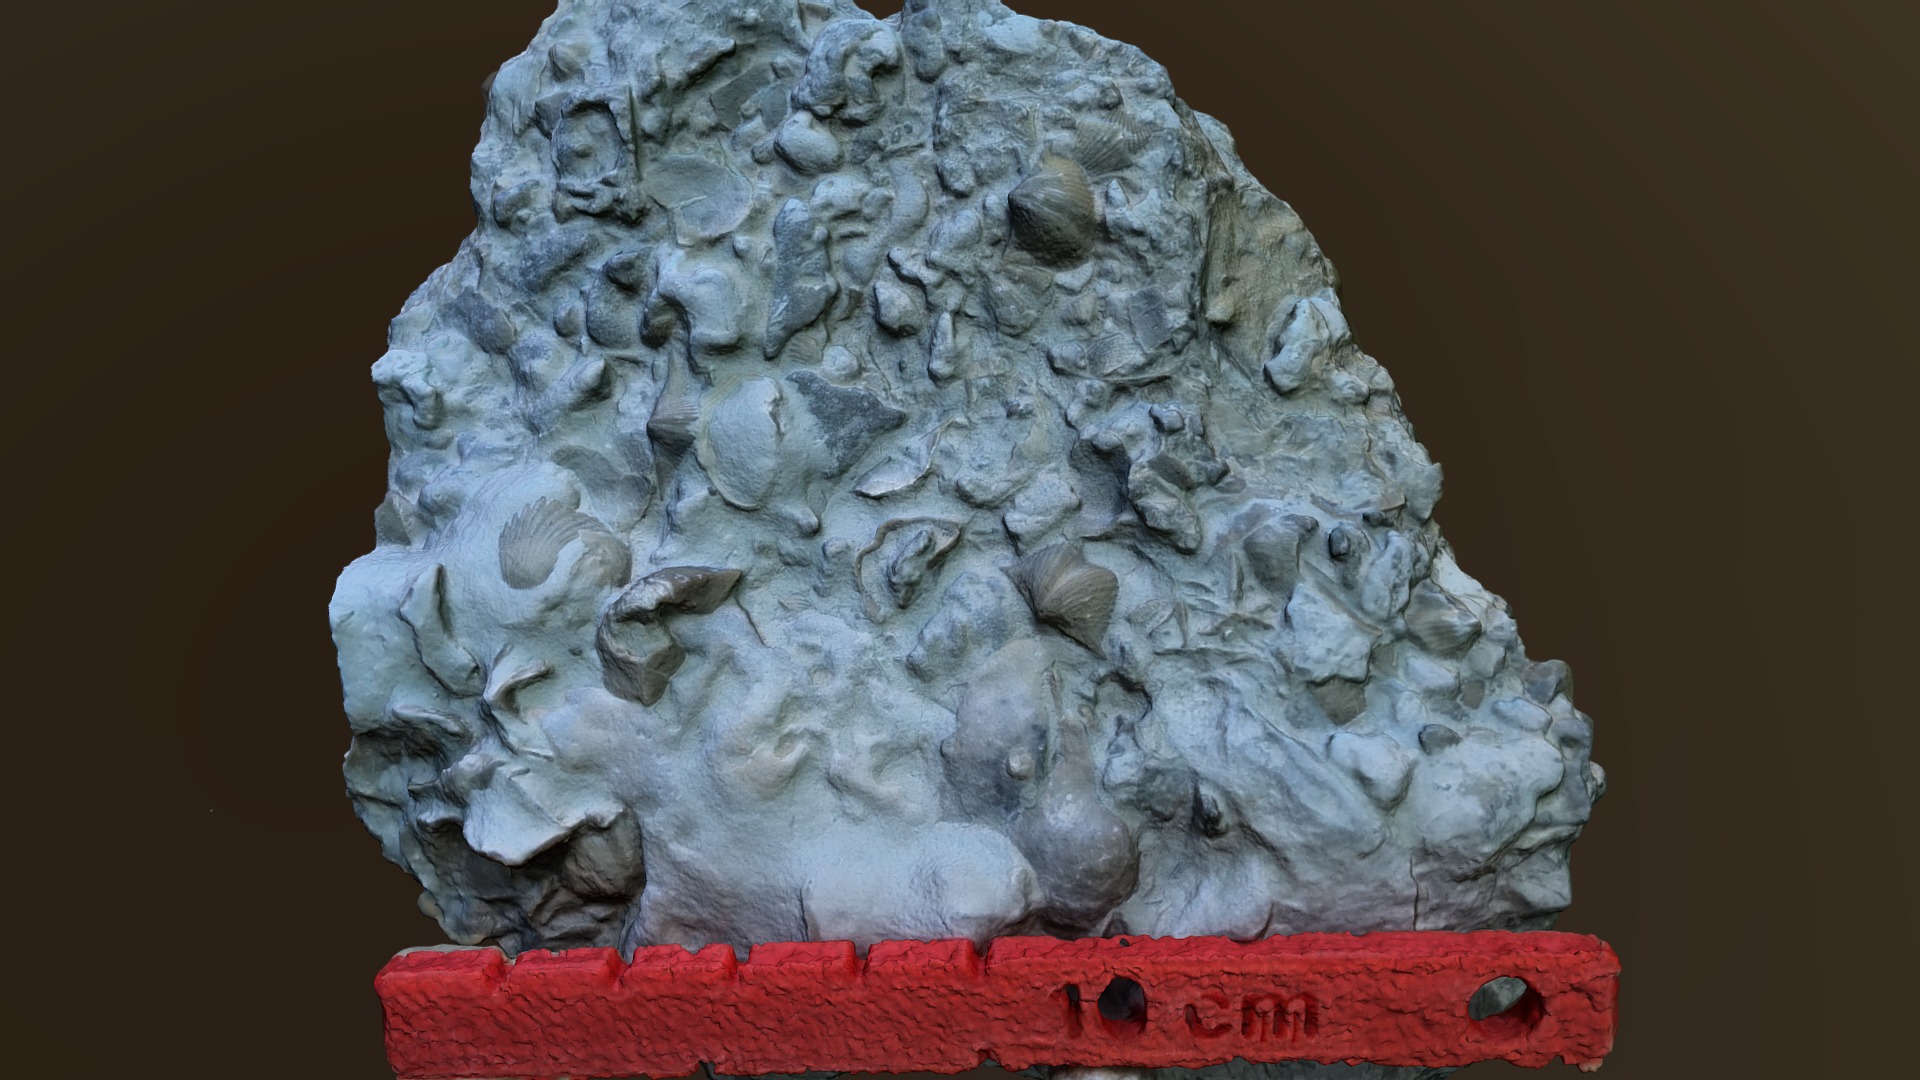 3D model SJ2-6 - This is a 3D model of the SJ2-6. The 3D model is about a white rock with a black background.